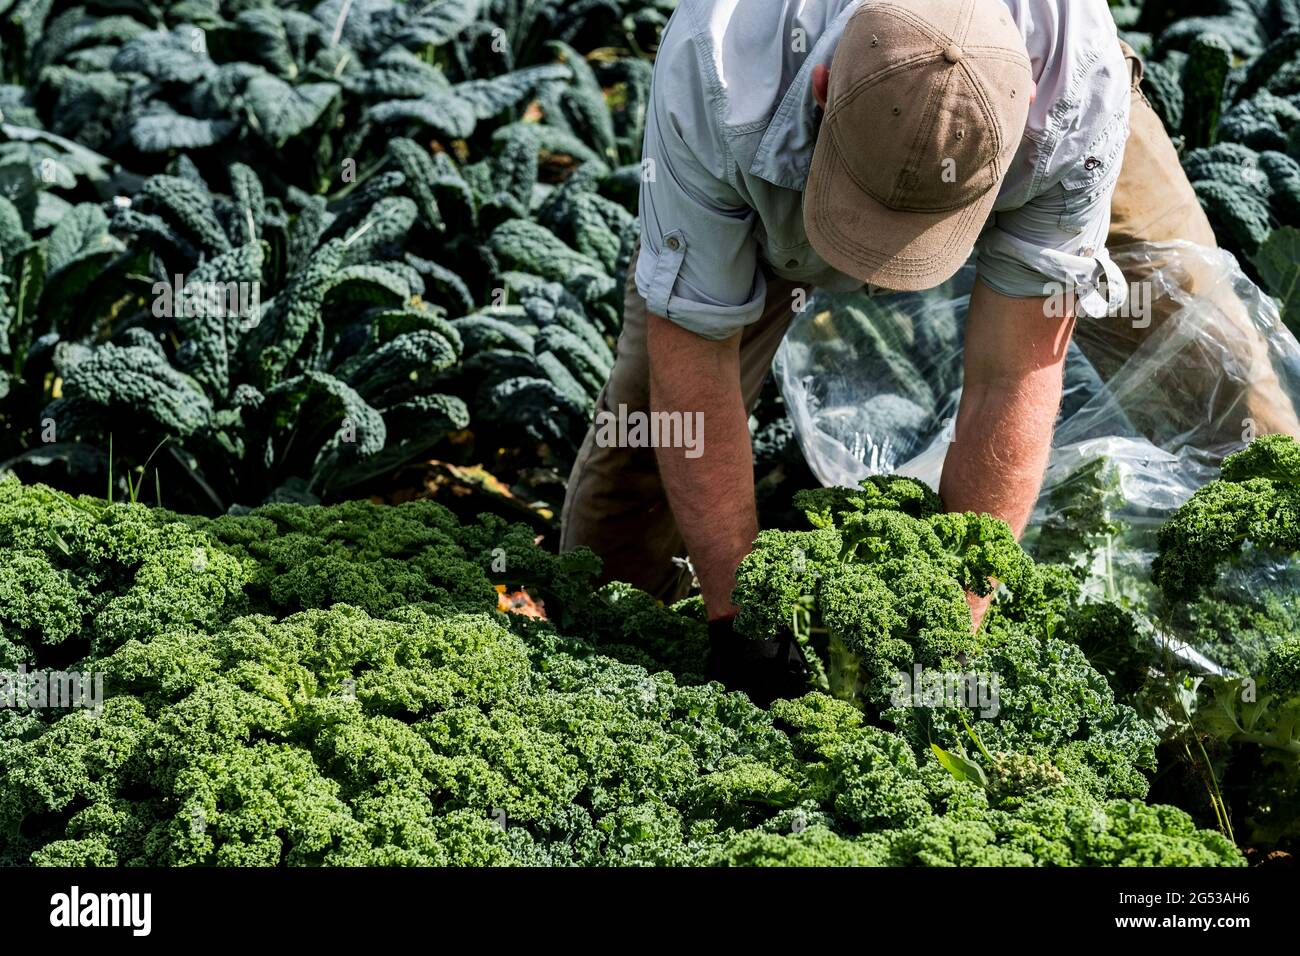 Farmer standing in a field, picking curly kale. Stock Photo